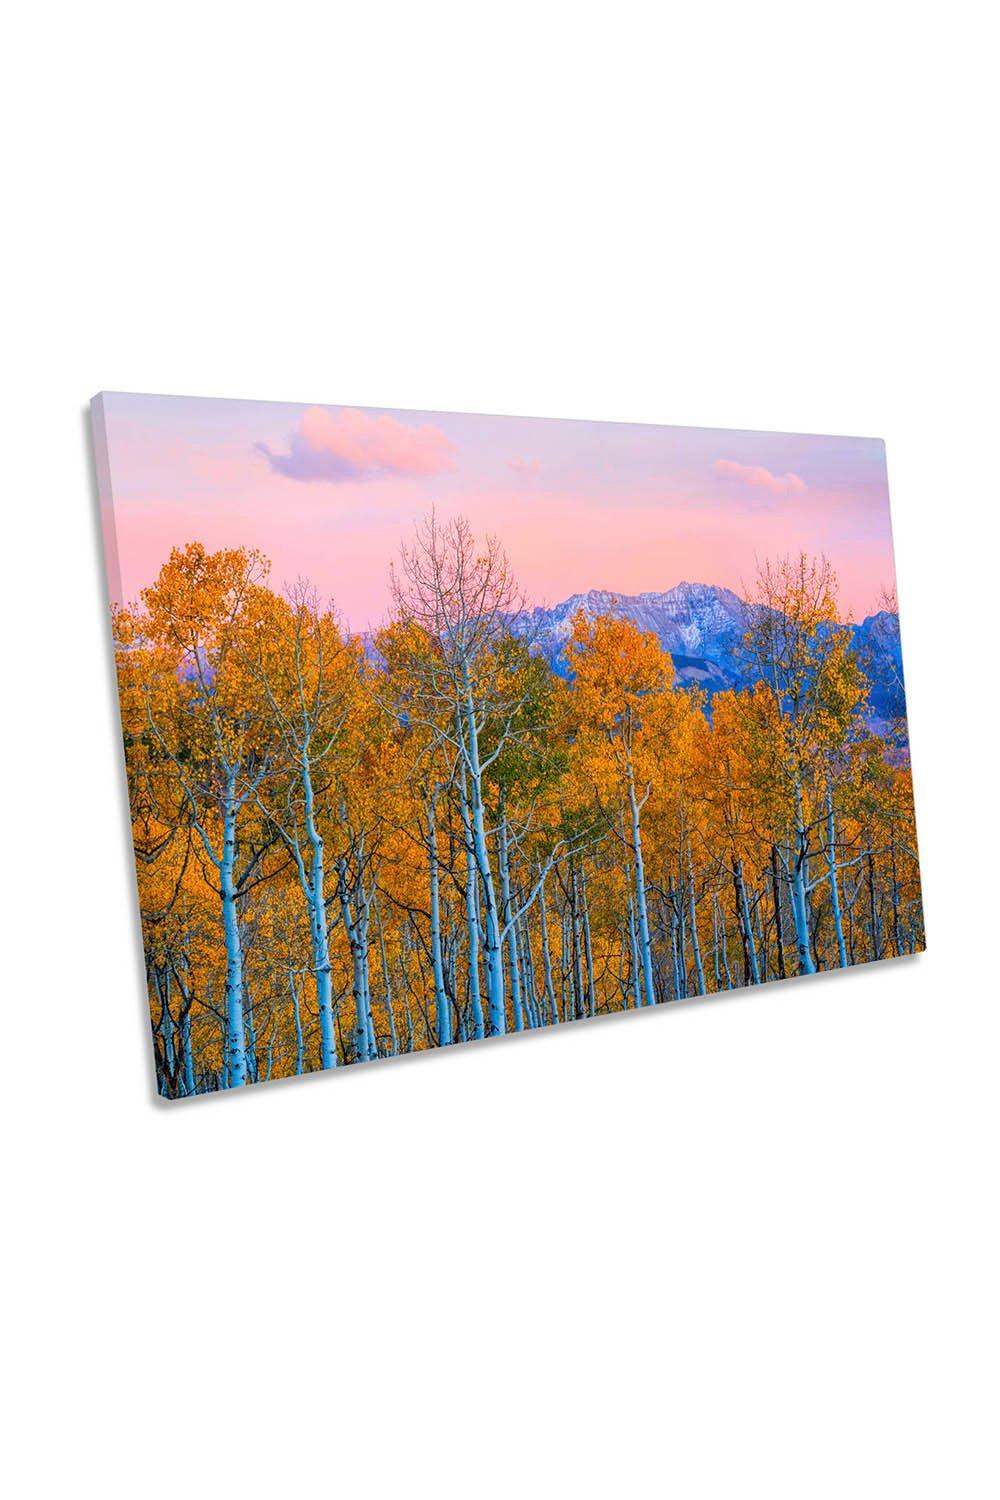 Autumn Delight Sunset Colorado Mountains Canvas Wall Art Picture Print